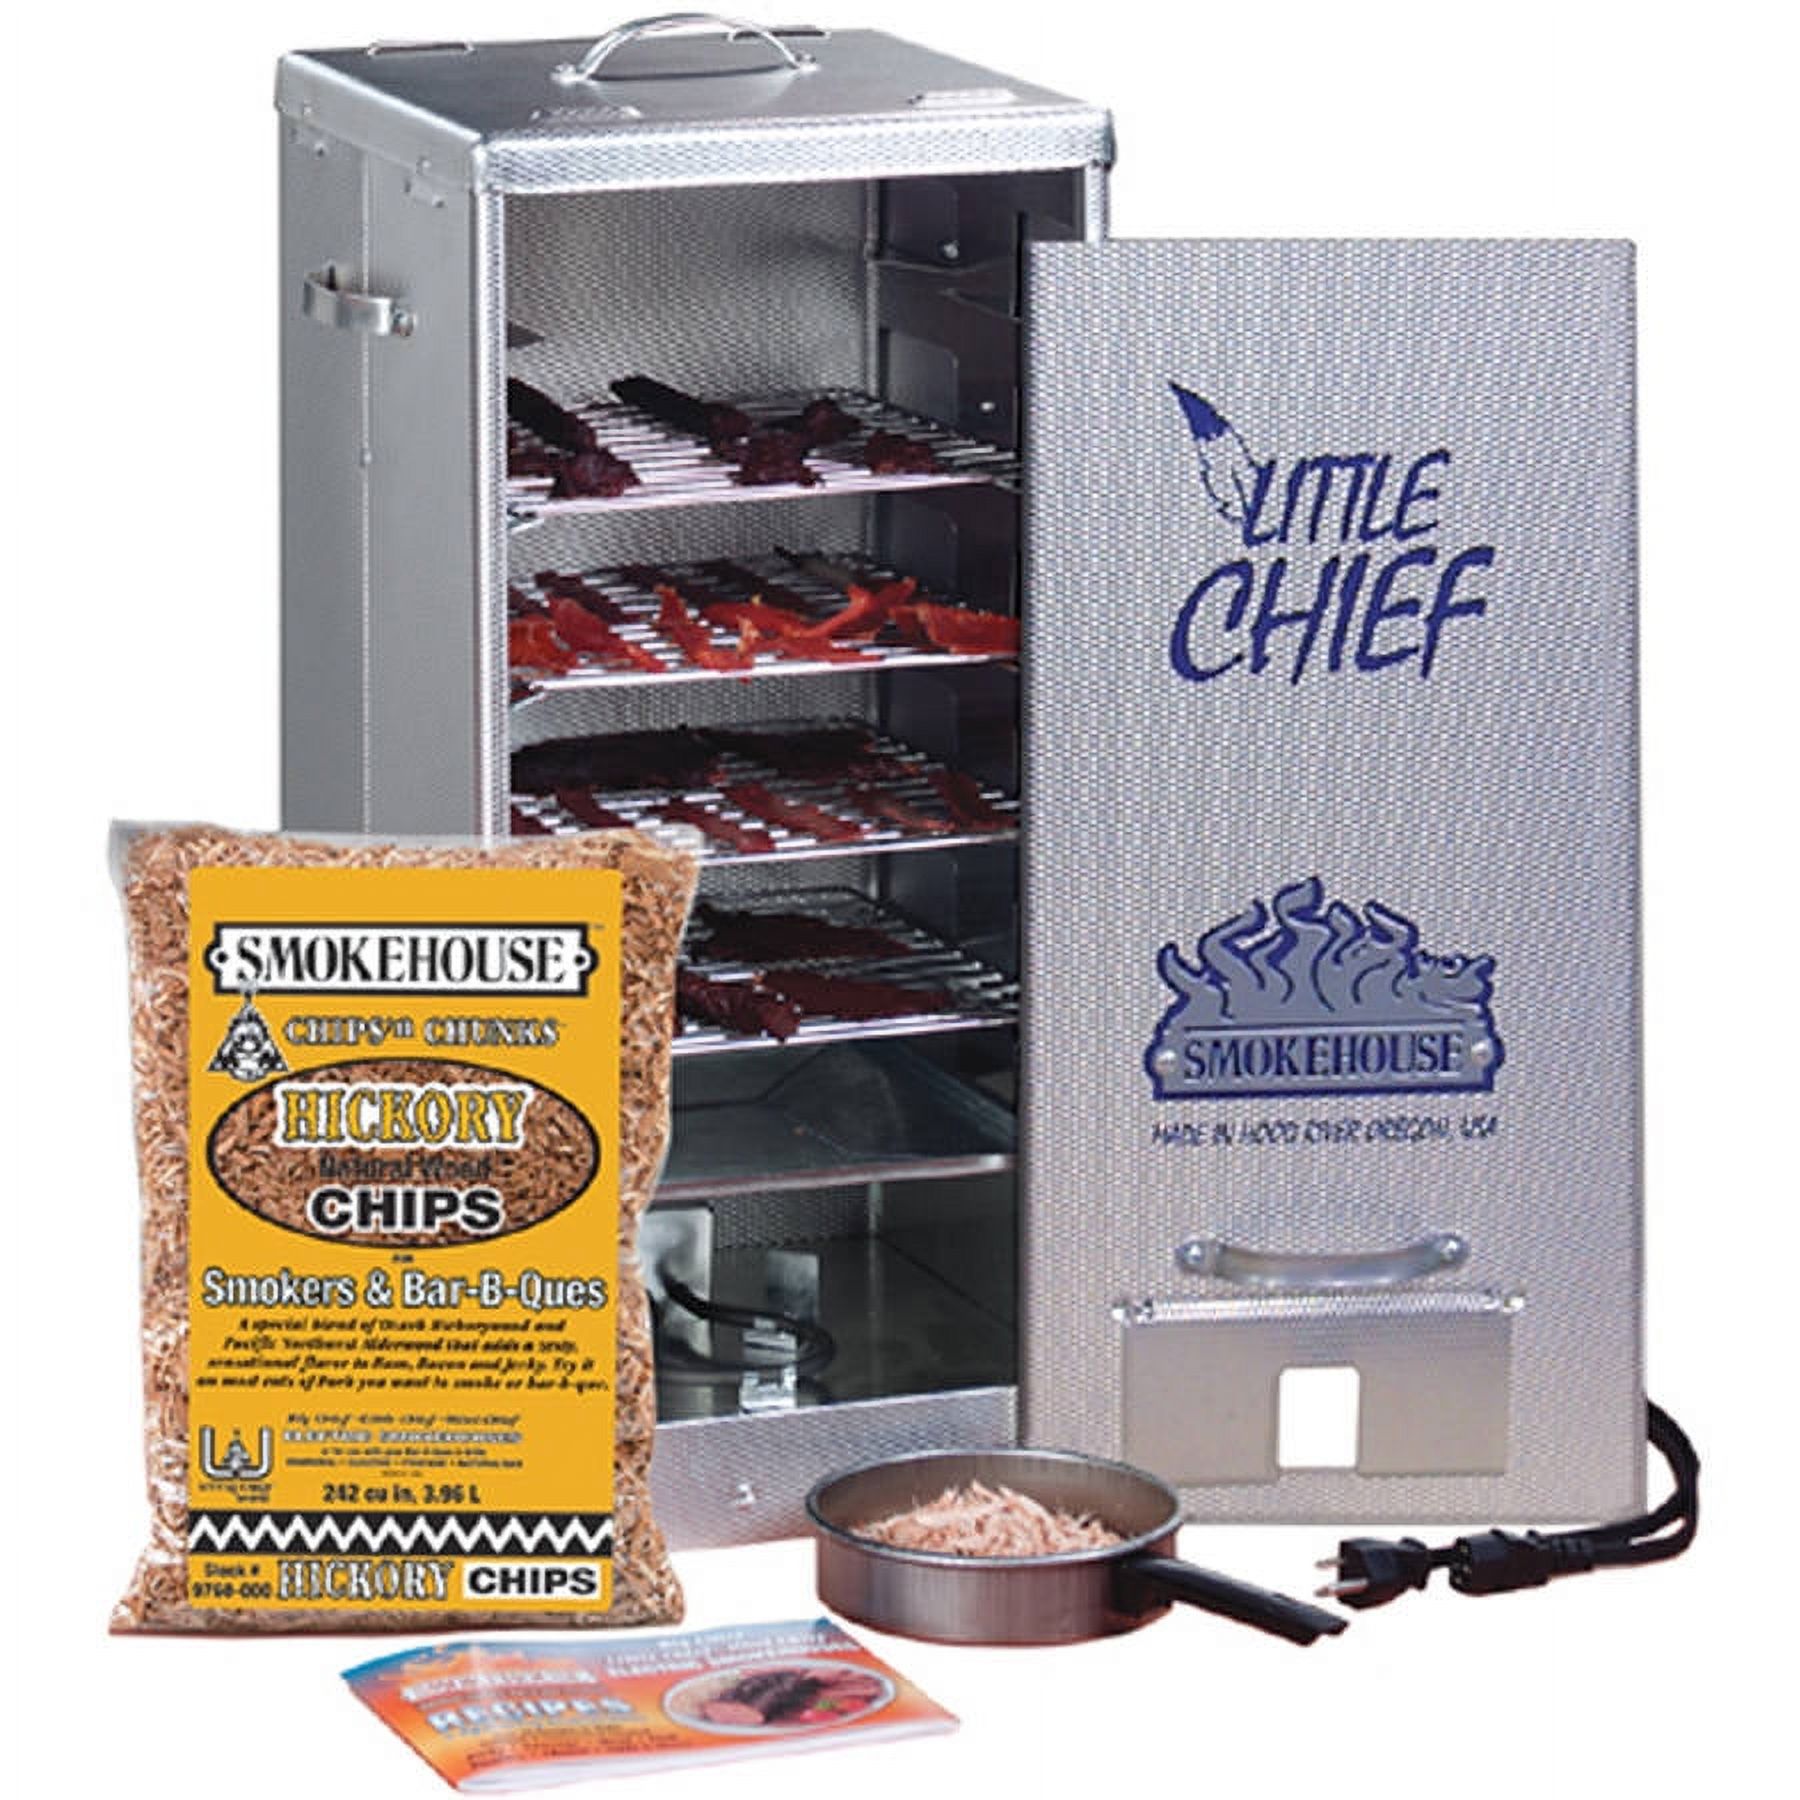 Smokehouse Products Little Chief Front Load Smoker - image 1 of 3